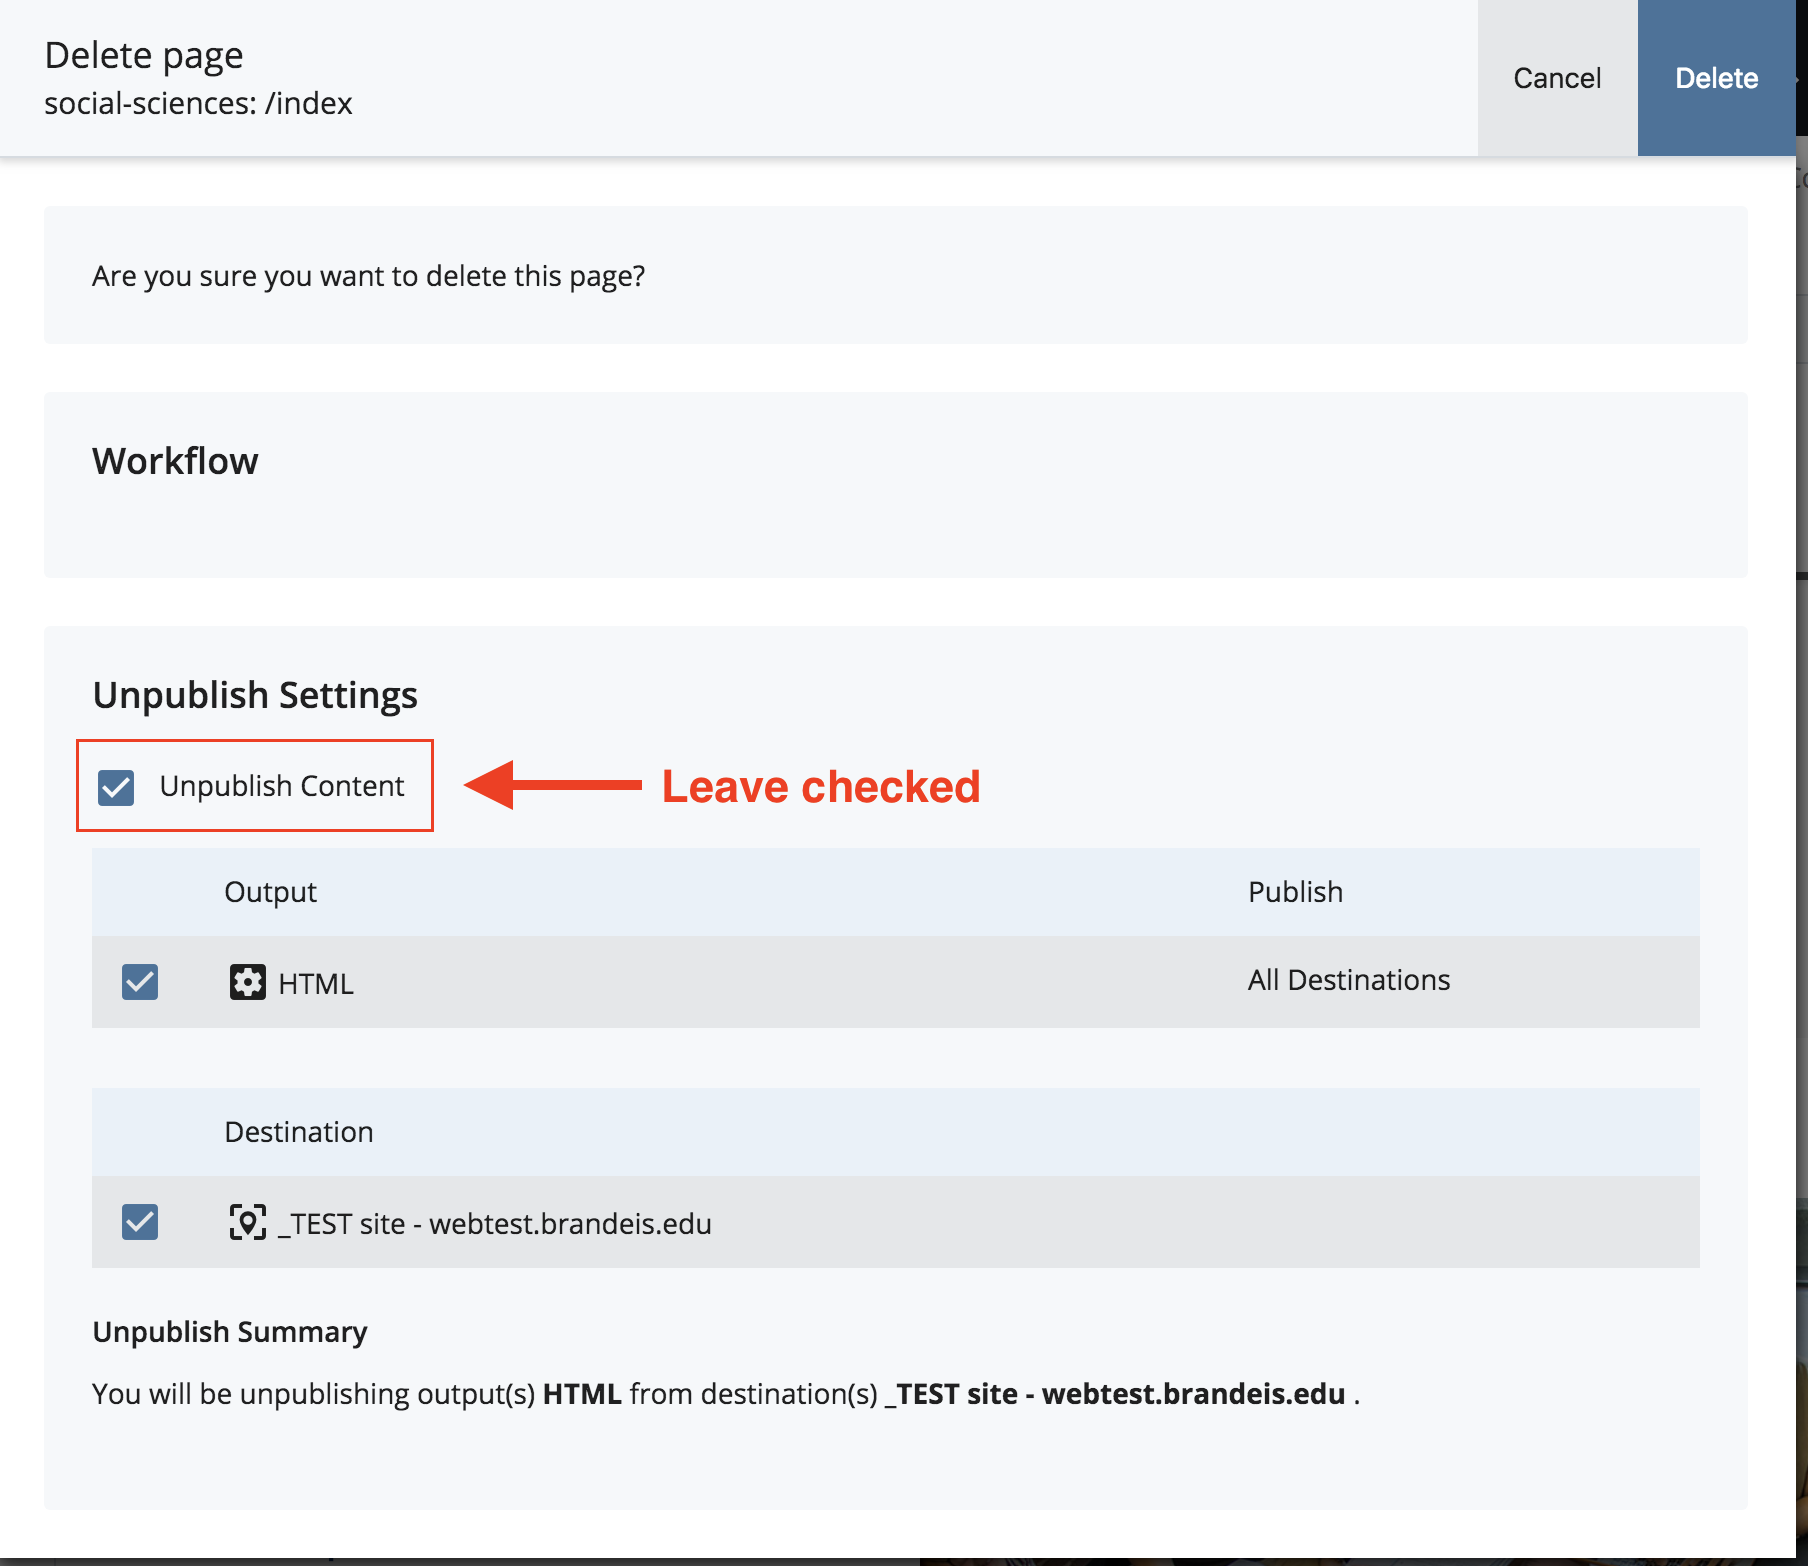 Unpublish checkbox checked and outlined in red, text reads: Leave checked